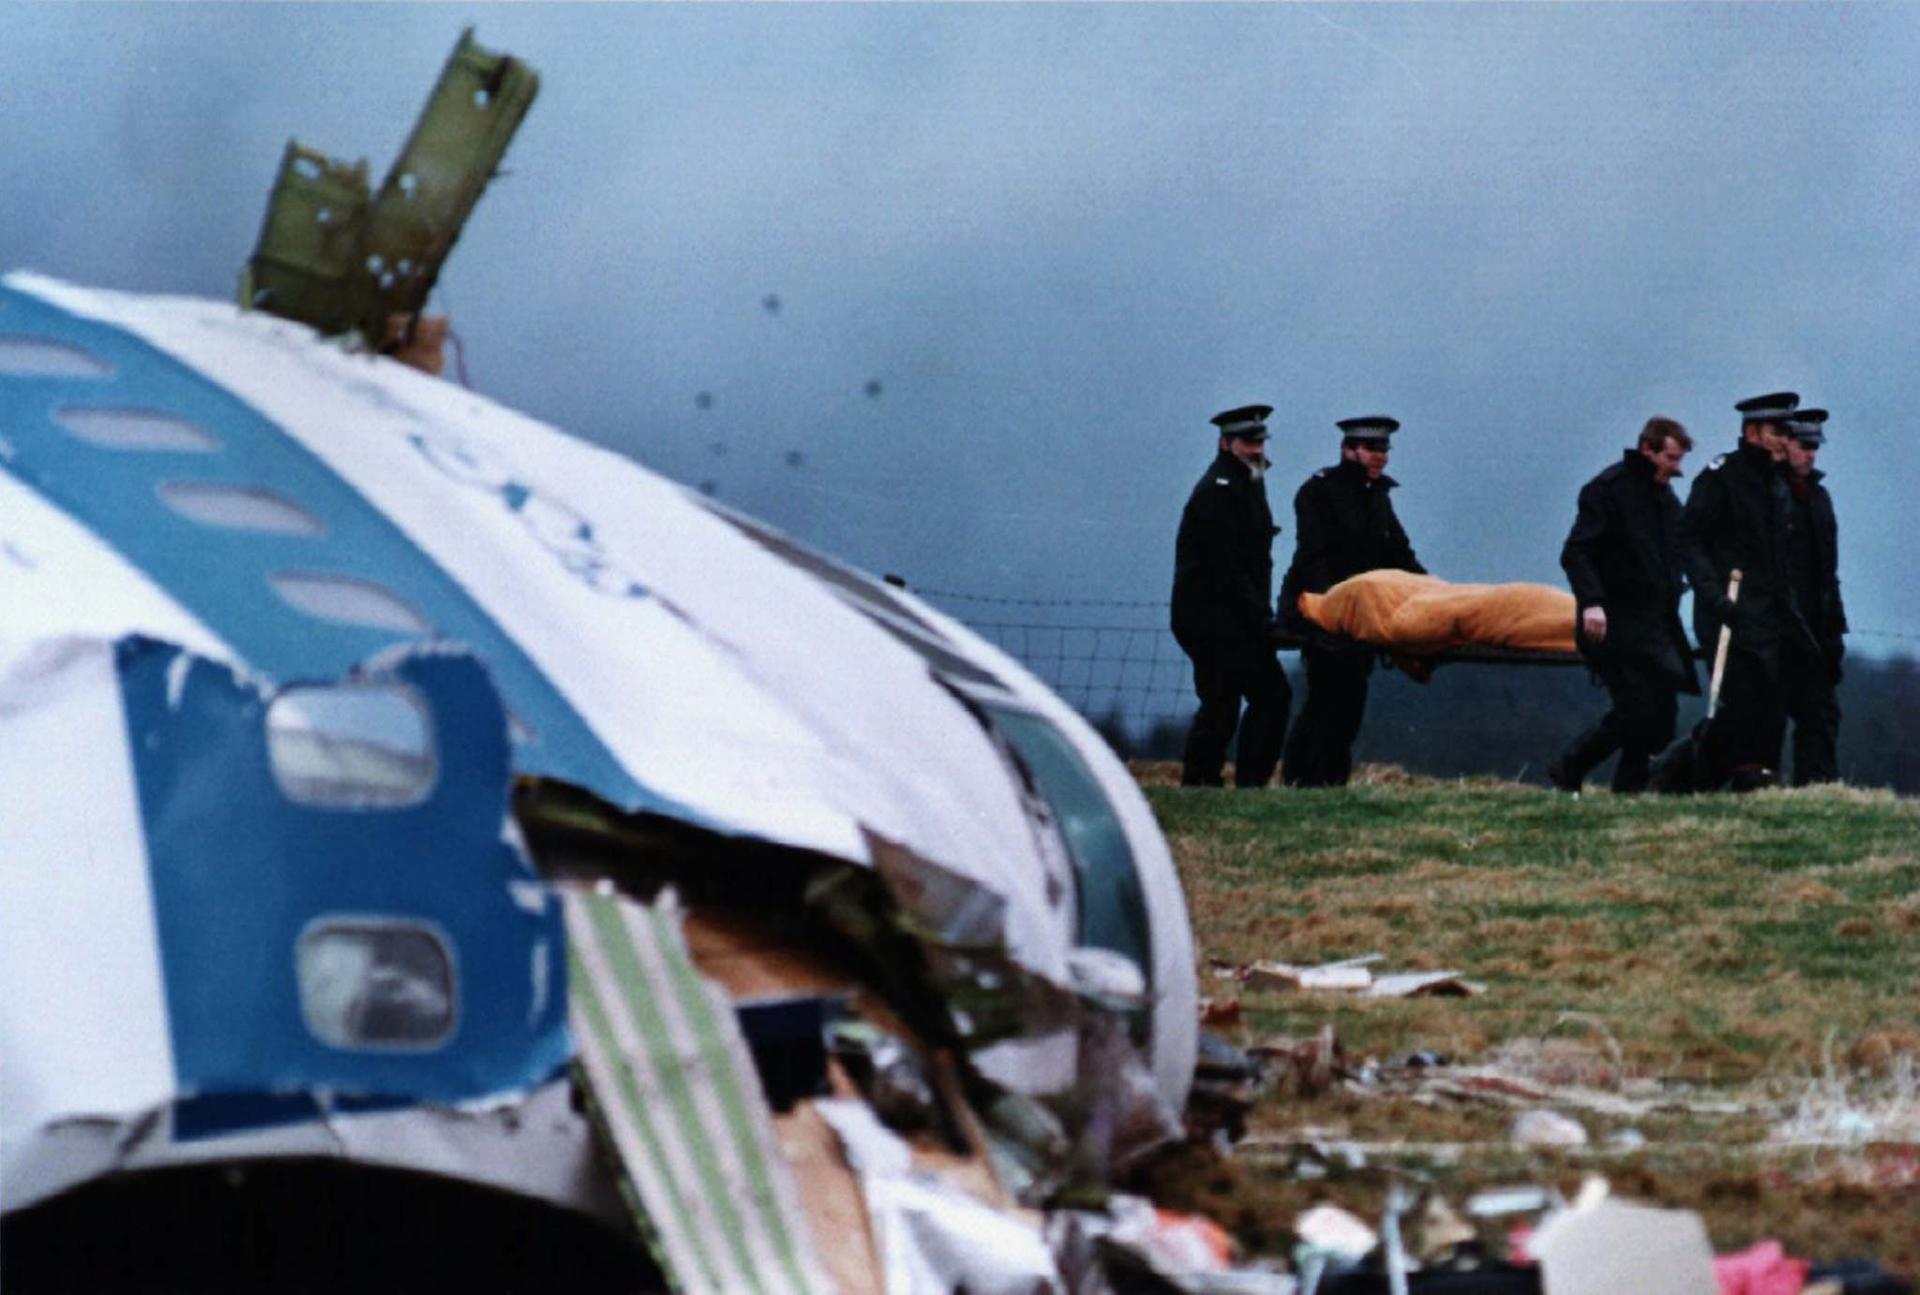 File photo from December 22, 1988, shows rescue personnel carrying a body away from the site of the crash in Lockerbie. A total of 270 people were killed when a bomb ripped apart Pan Am flight 103 over the Scottish town of Lockerbie in 1988.